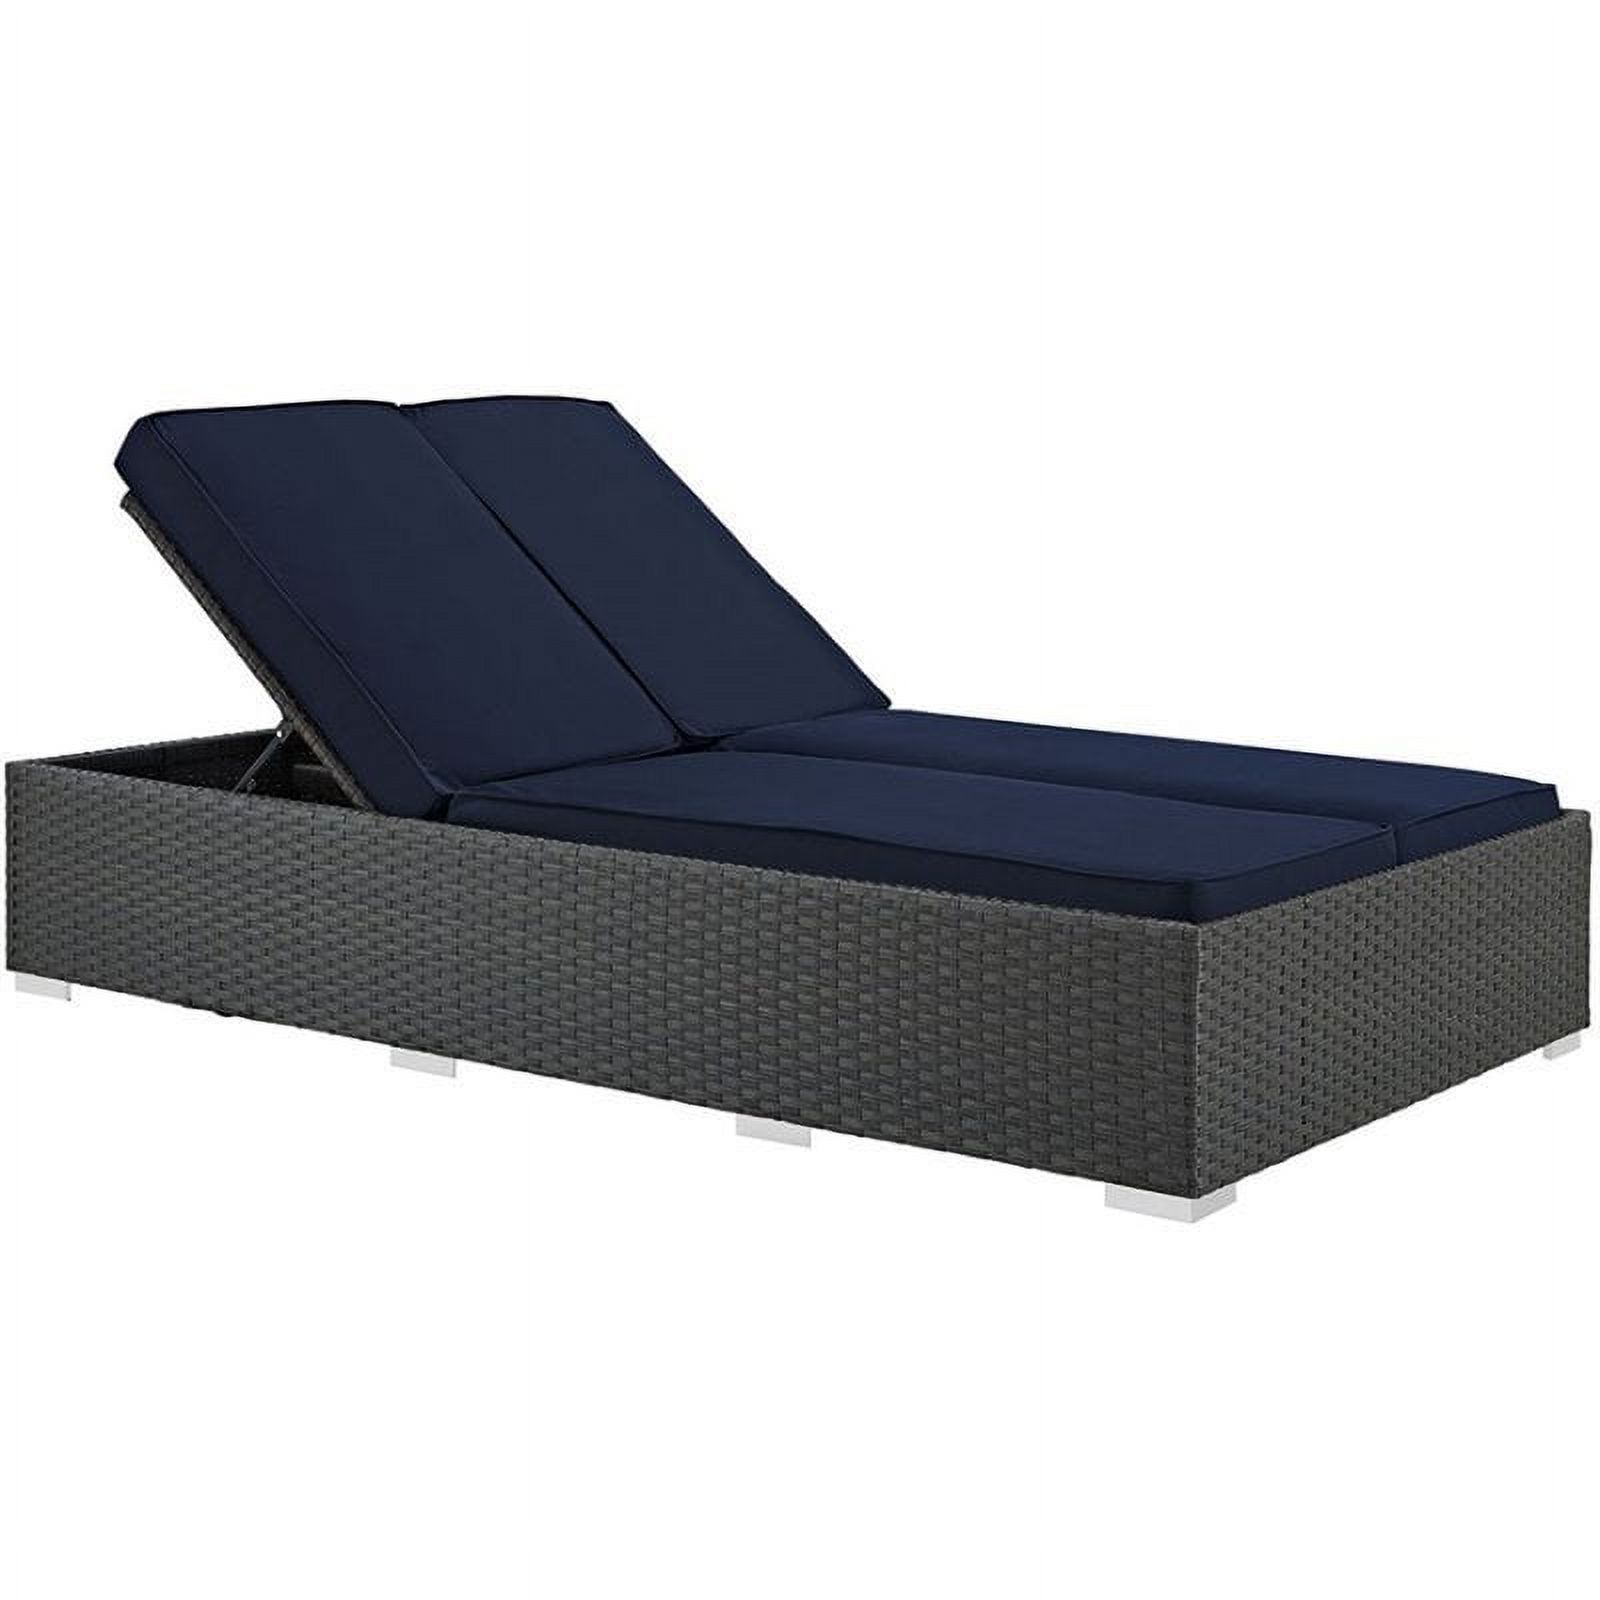 Hawthorne Collection Patio Double Chaise Lounge in Chocolate and Navy - image 1 of 1